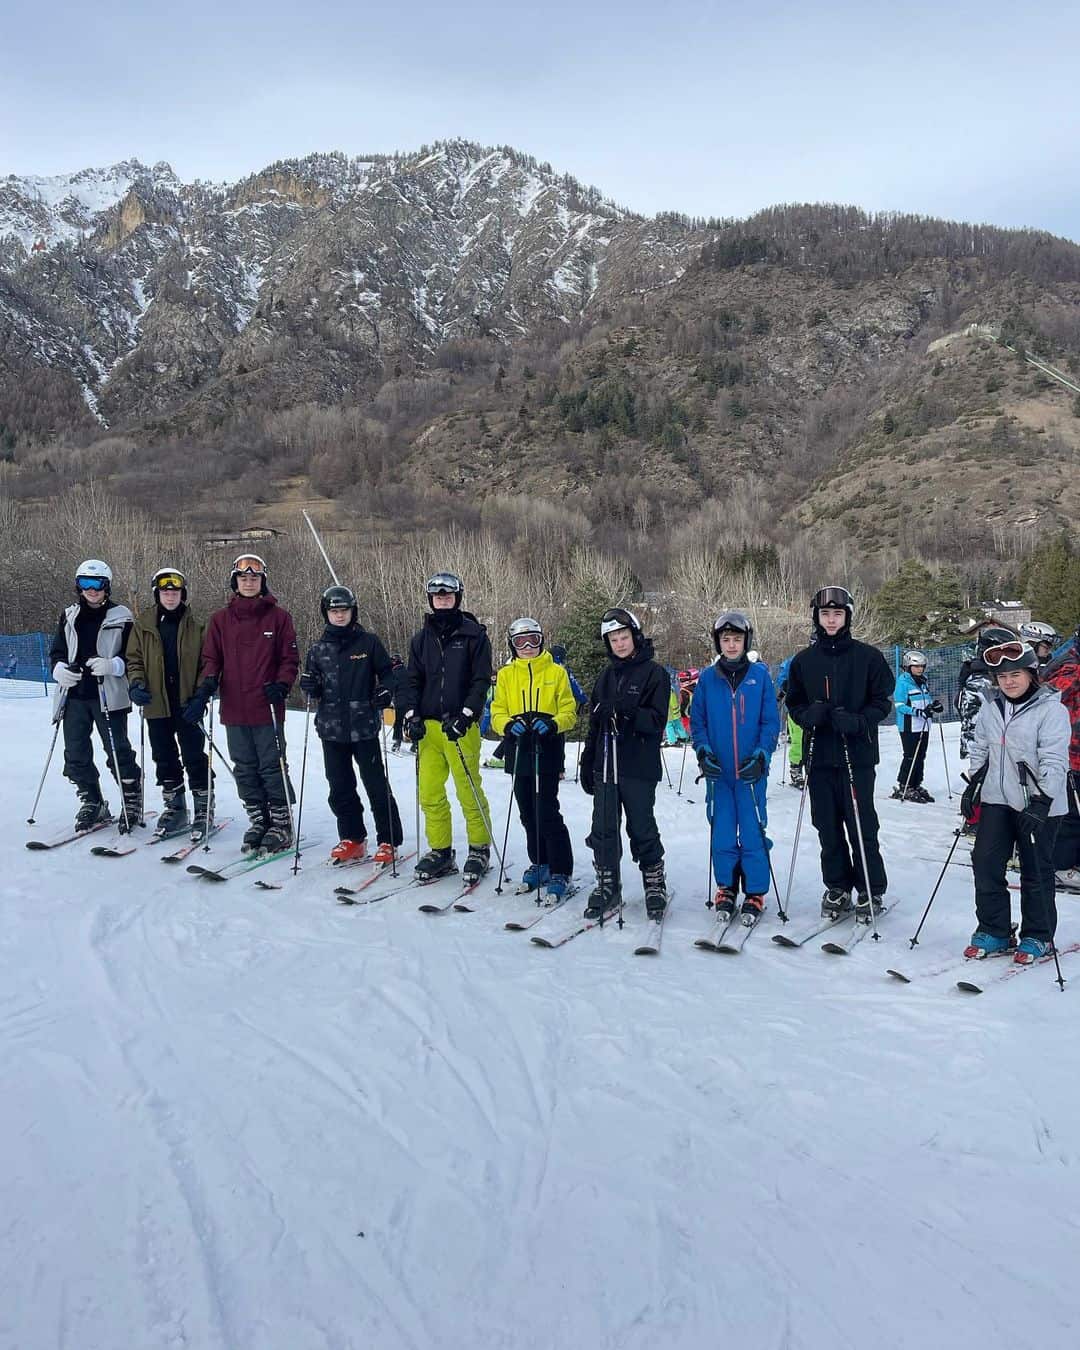 Cheadle Hulme High School students stand in a line on the ski slopes in Italy.